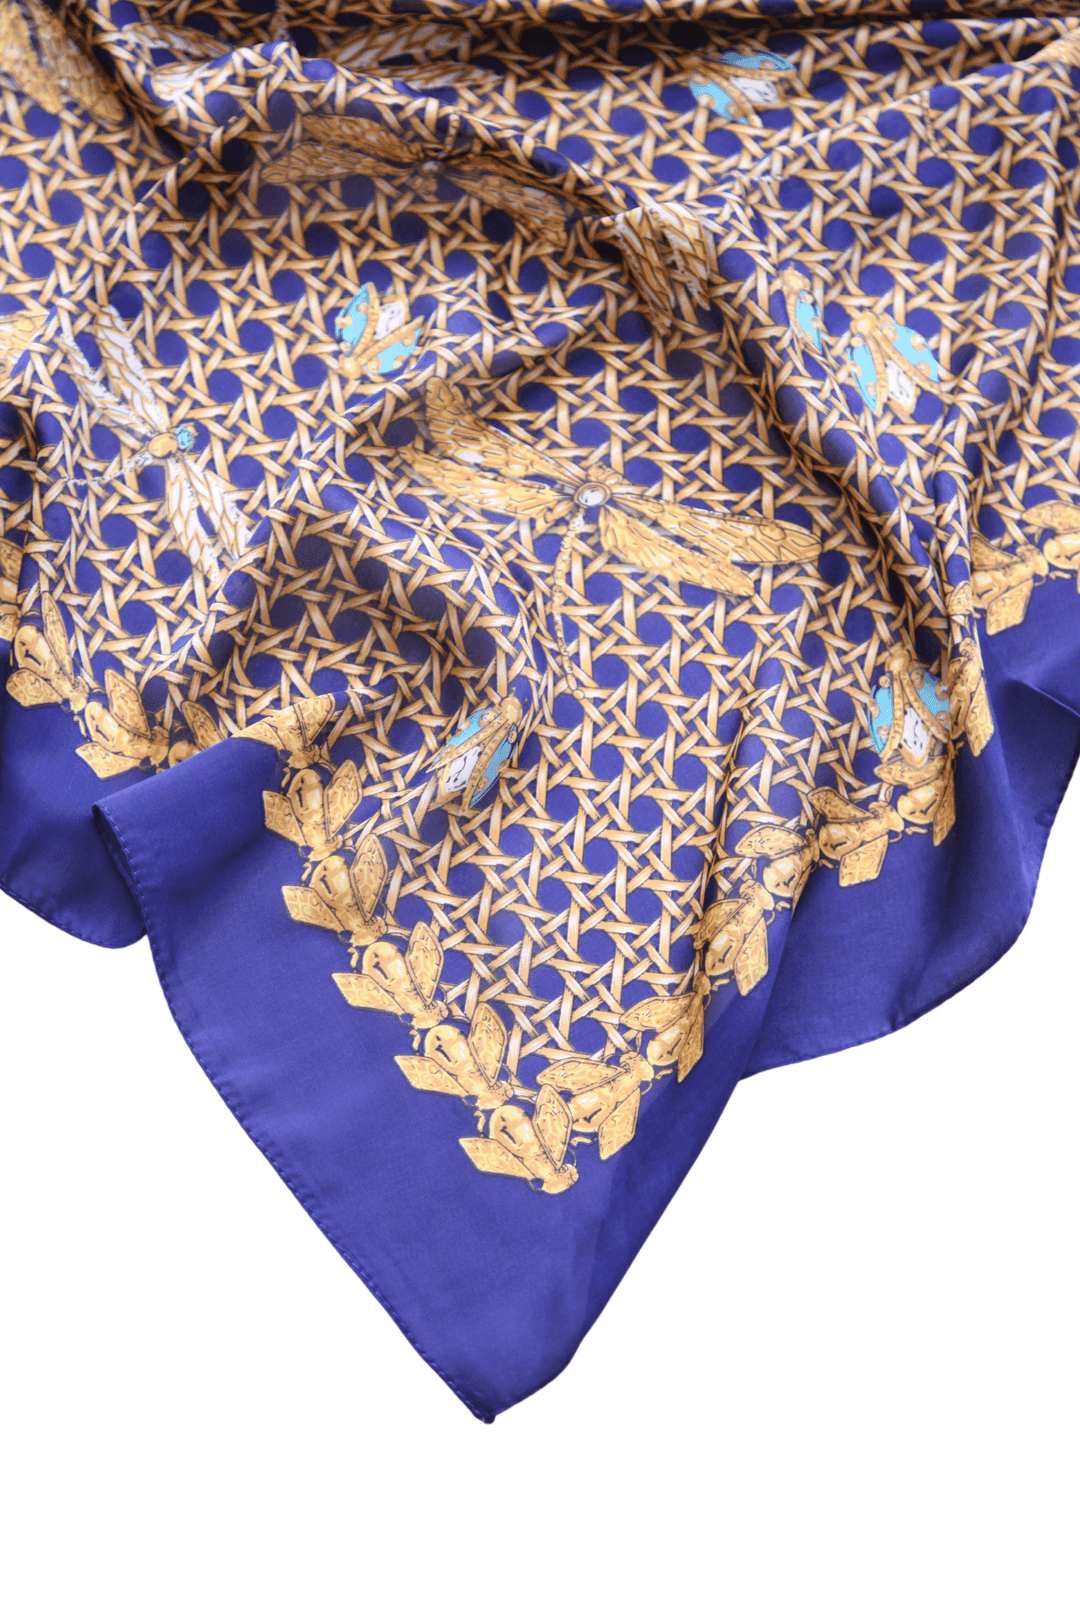 Gold and navy small scarf from women's boutique